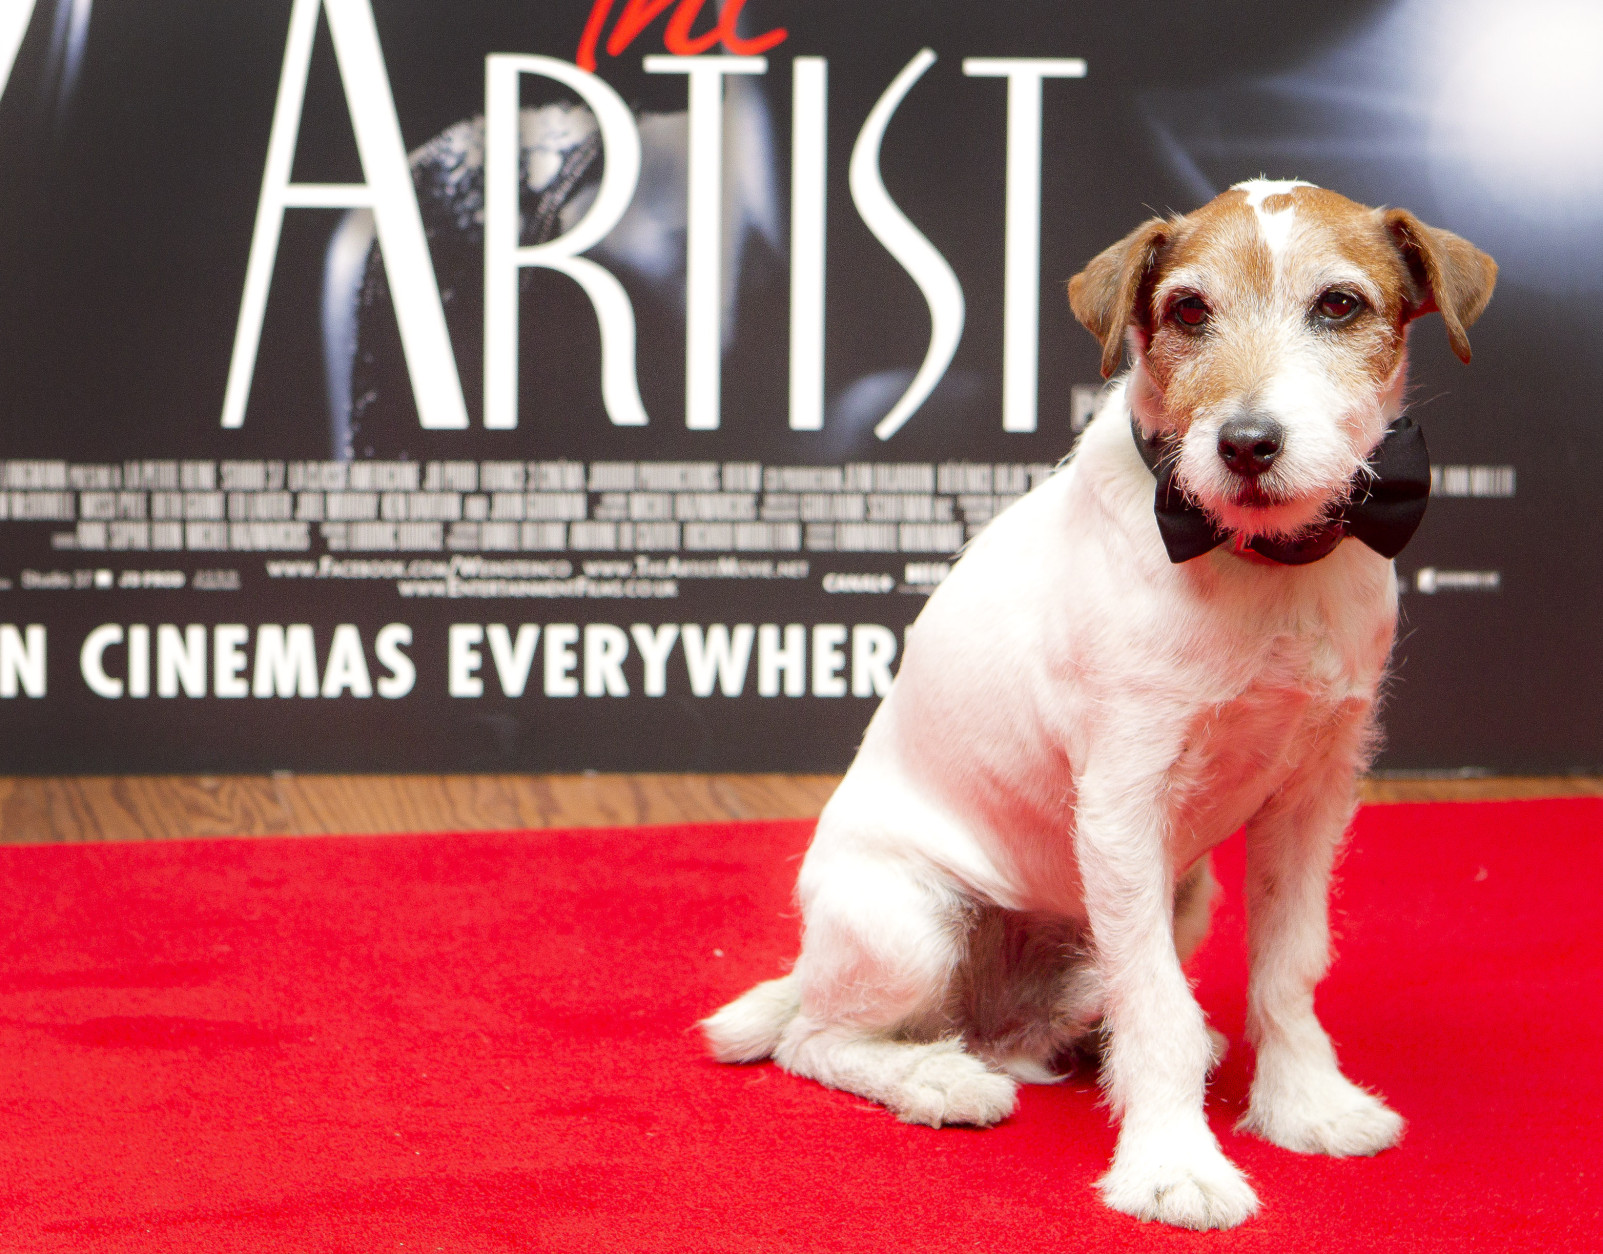 Uggie the dog who starred in the film The Artist, and was awarded the Palm Dog at the 2011 Cannes Film Festival, attends a special screening at a London cinema, Tuesday, Jan. 10, 2012. (AP Photo/Joel Ryan)